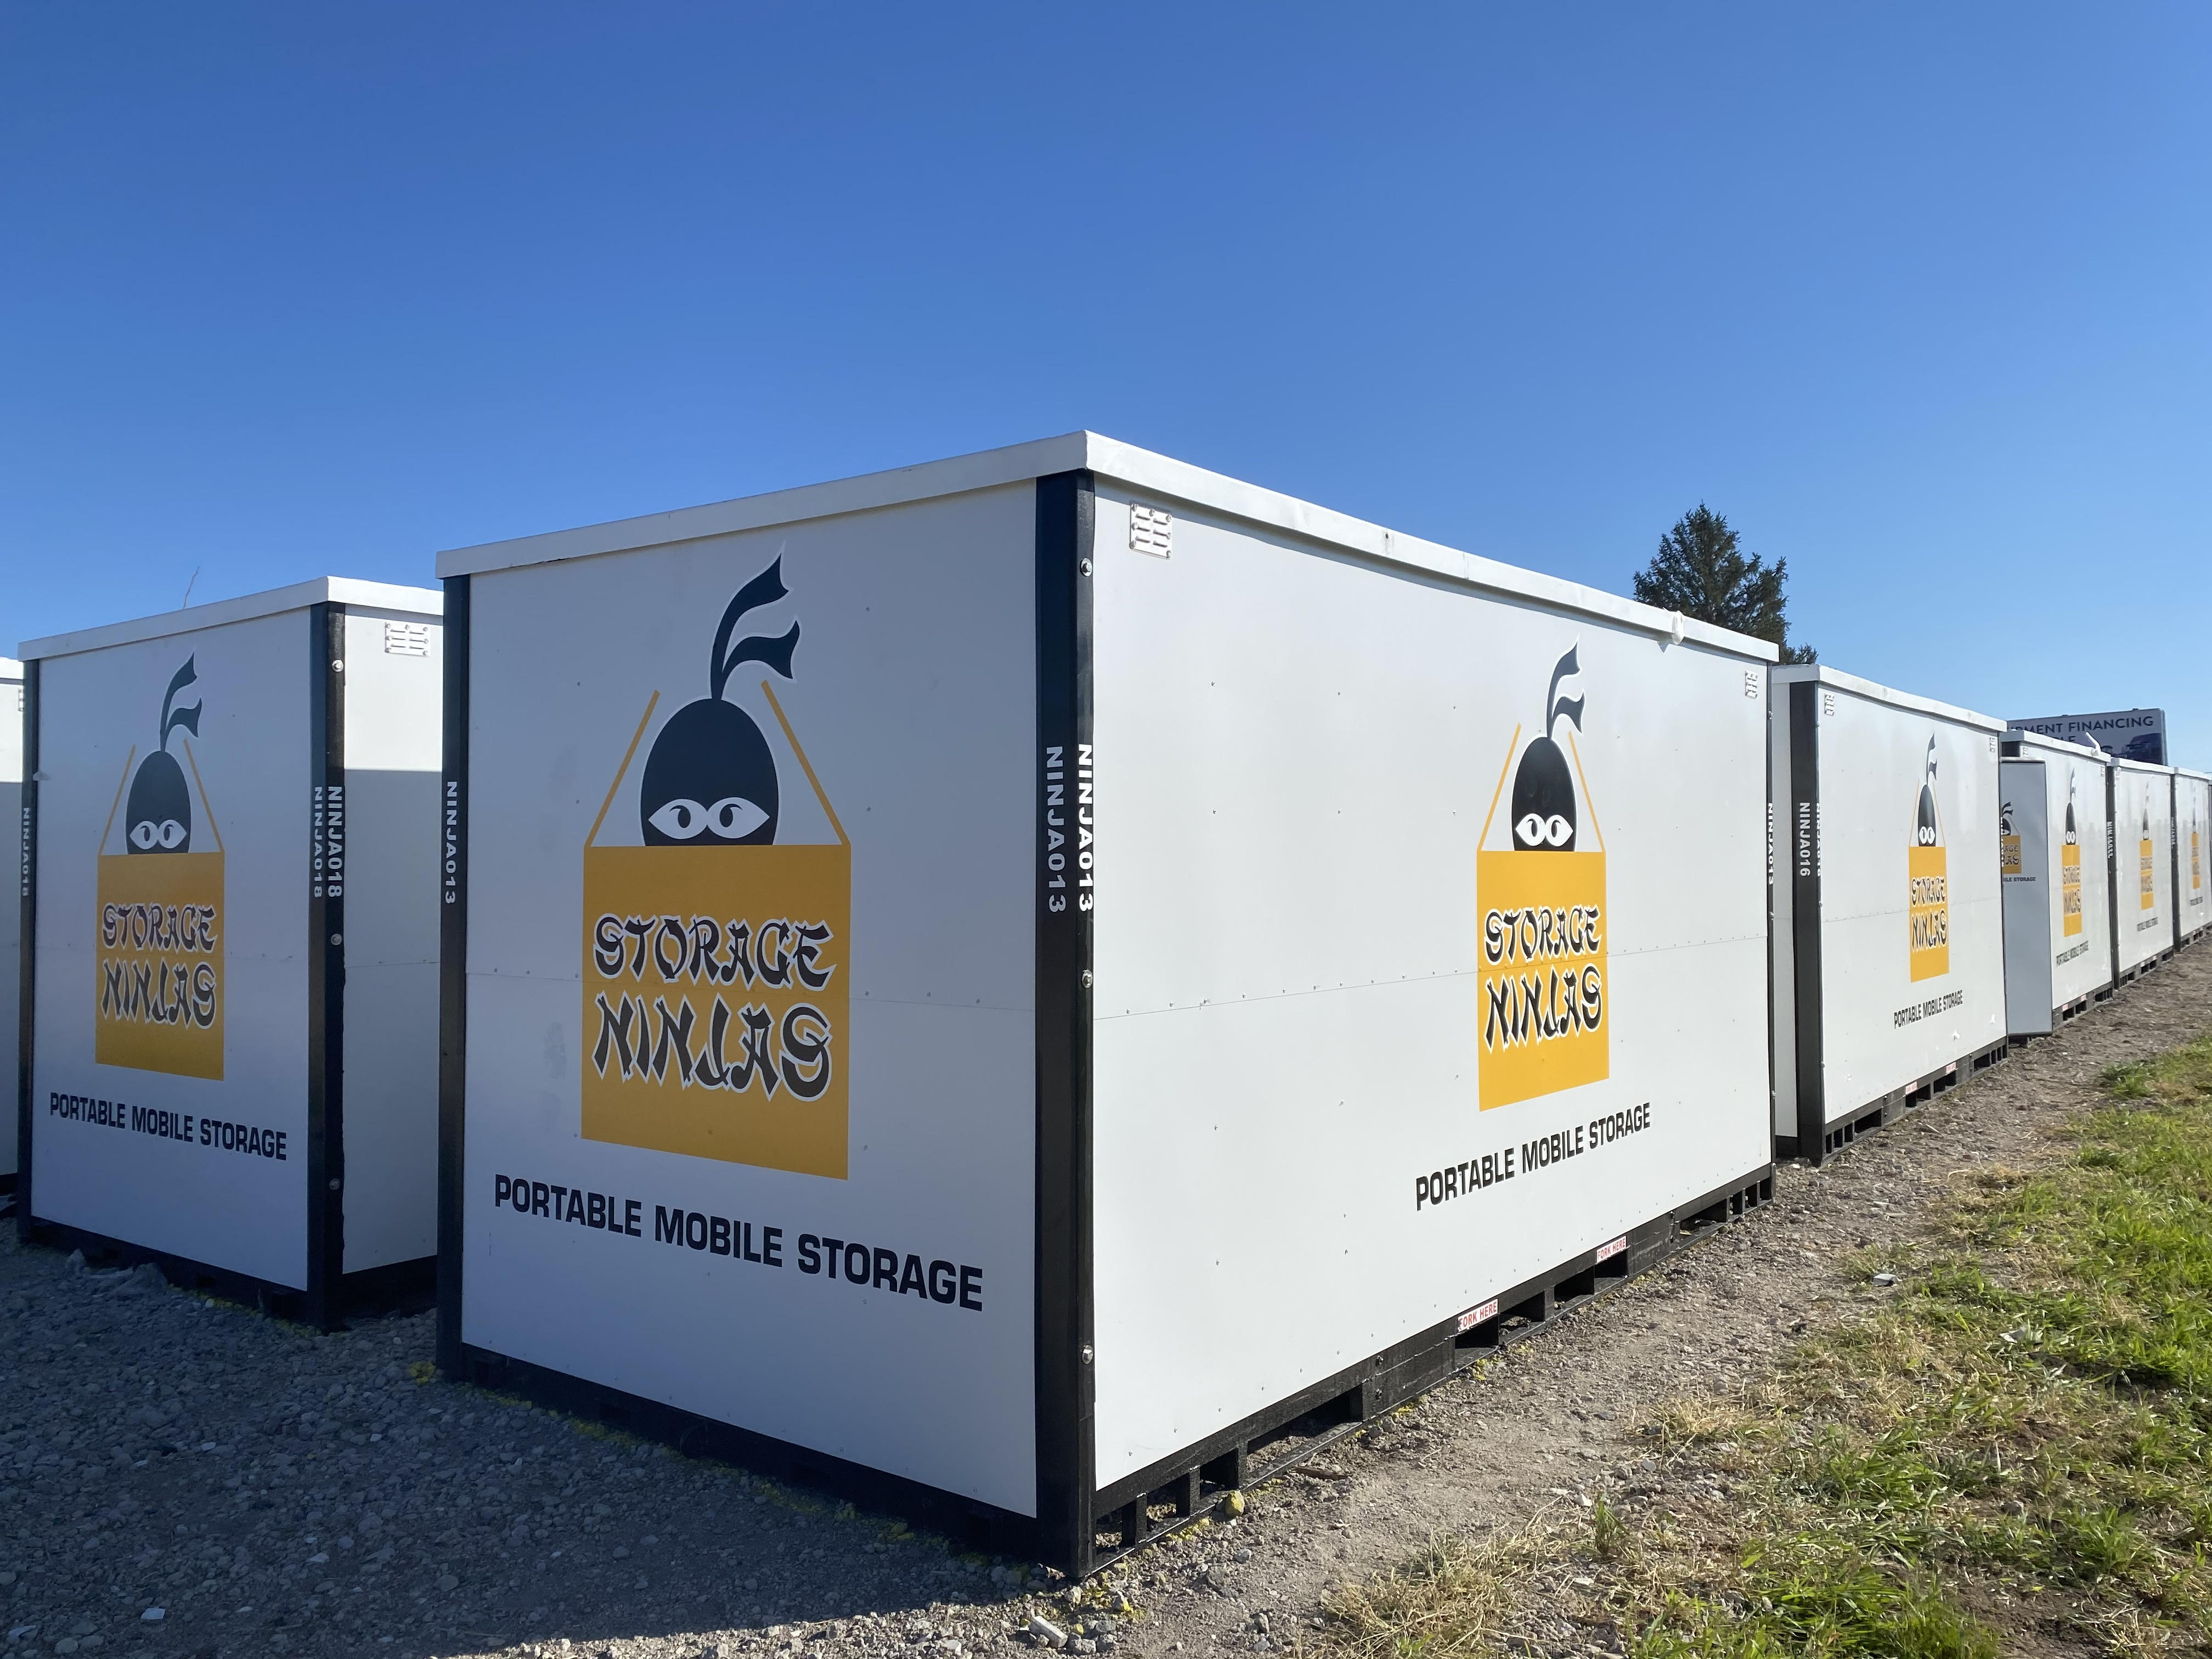 Storage Ninjas Grand Island now has Portable Storage Containers available for easy storage solutions wherever you need them.